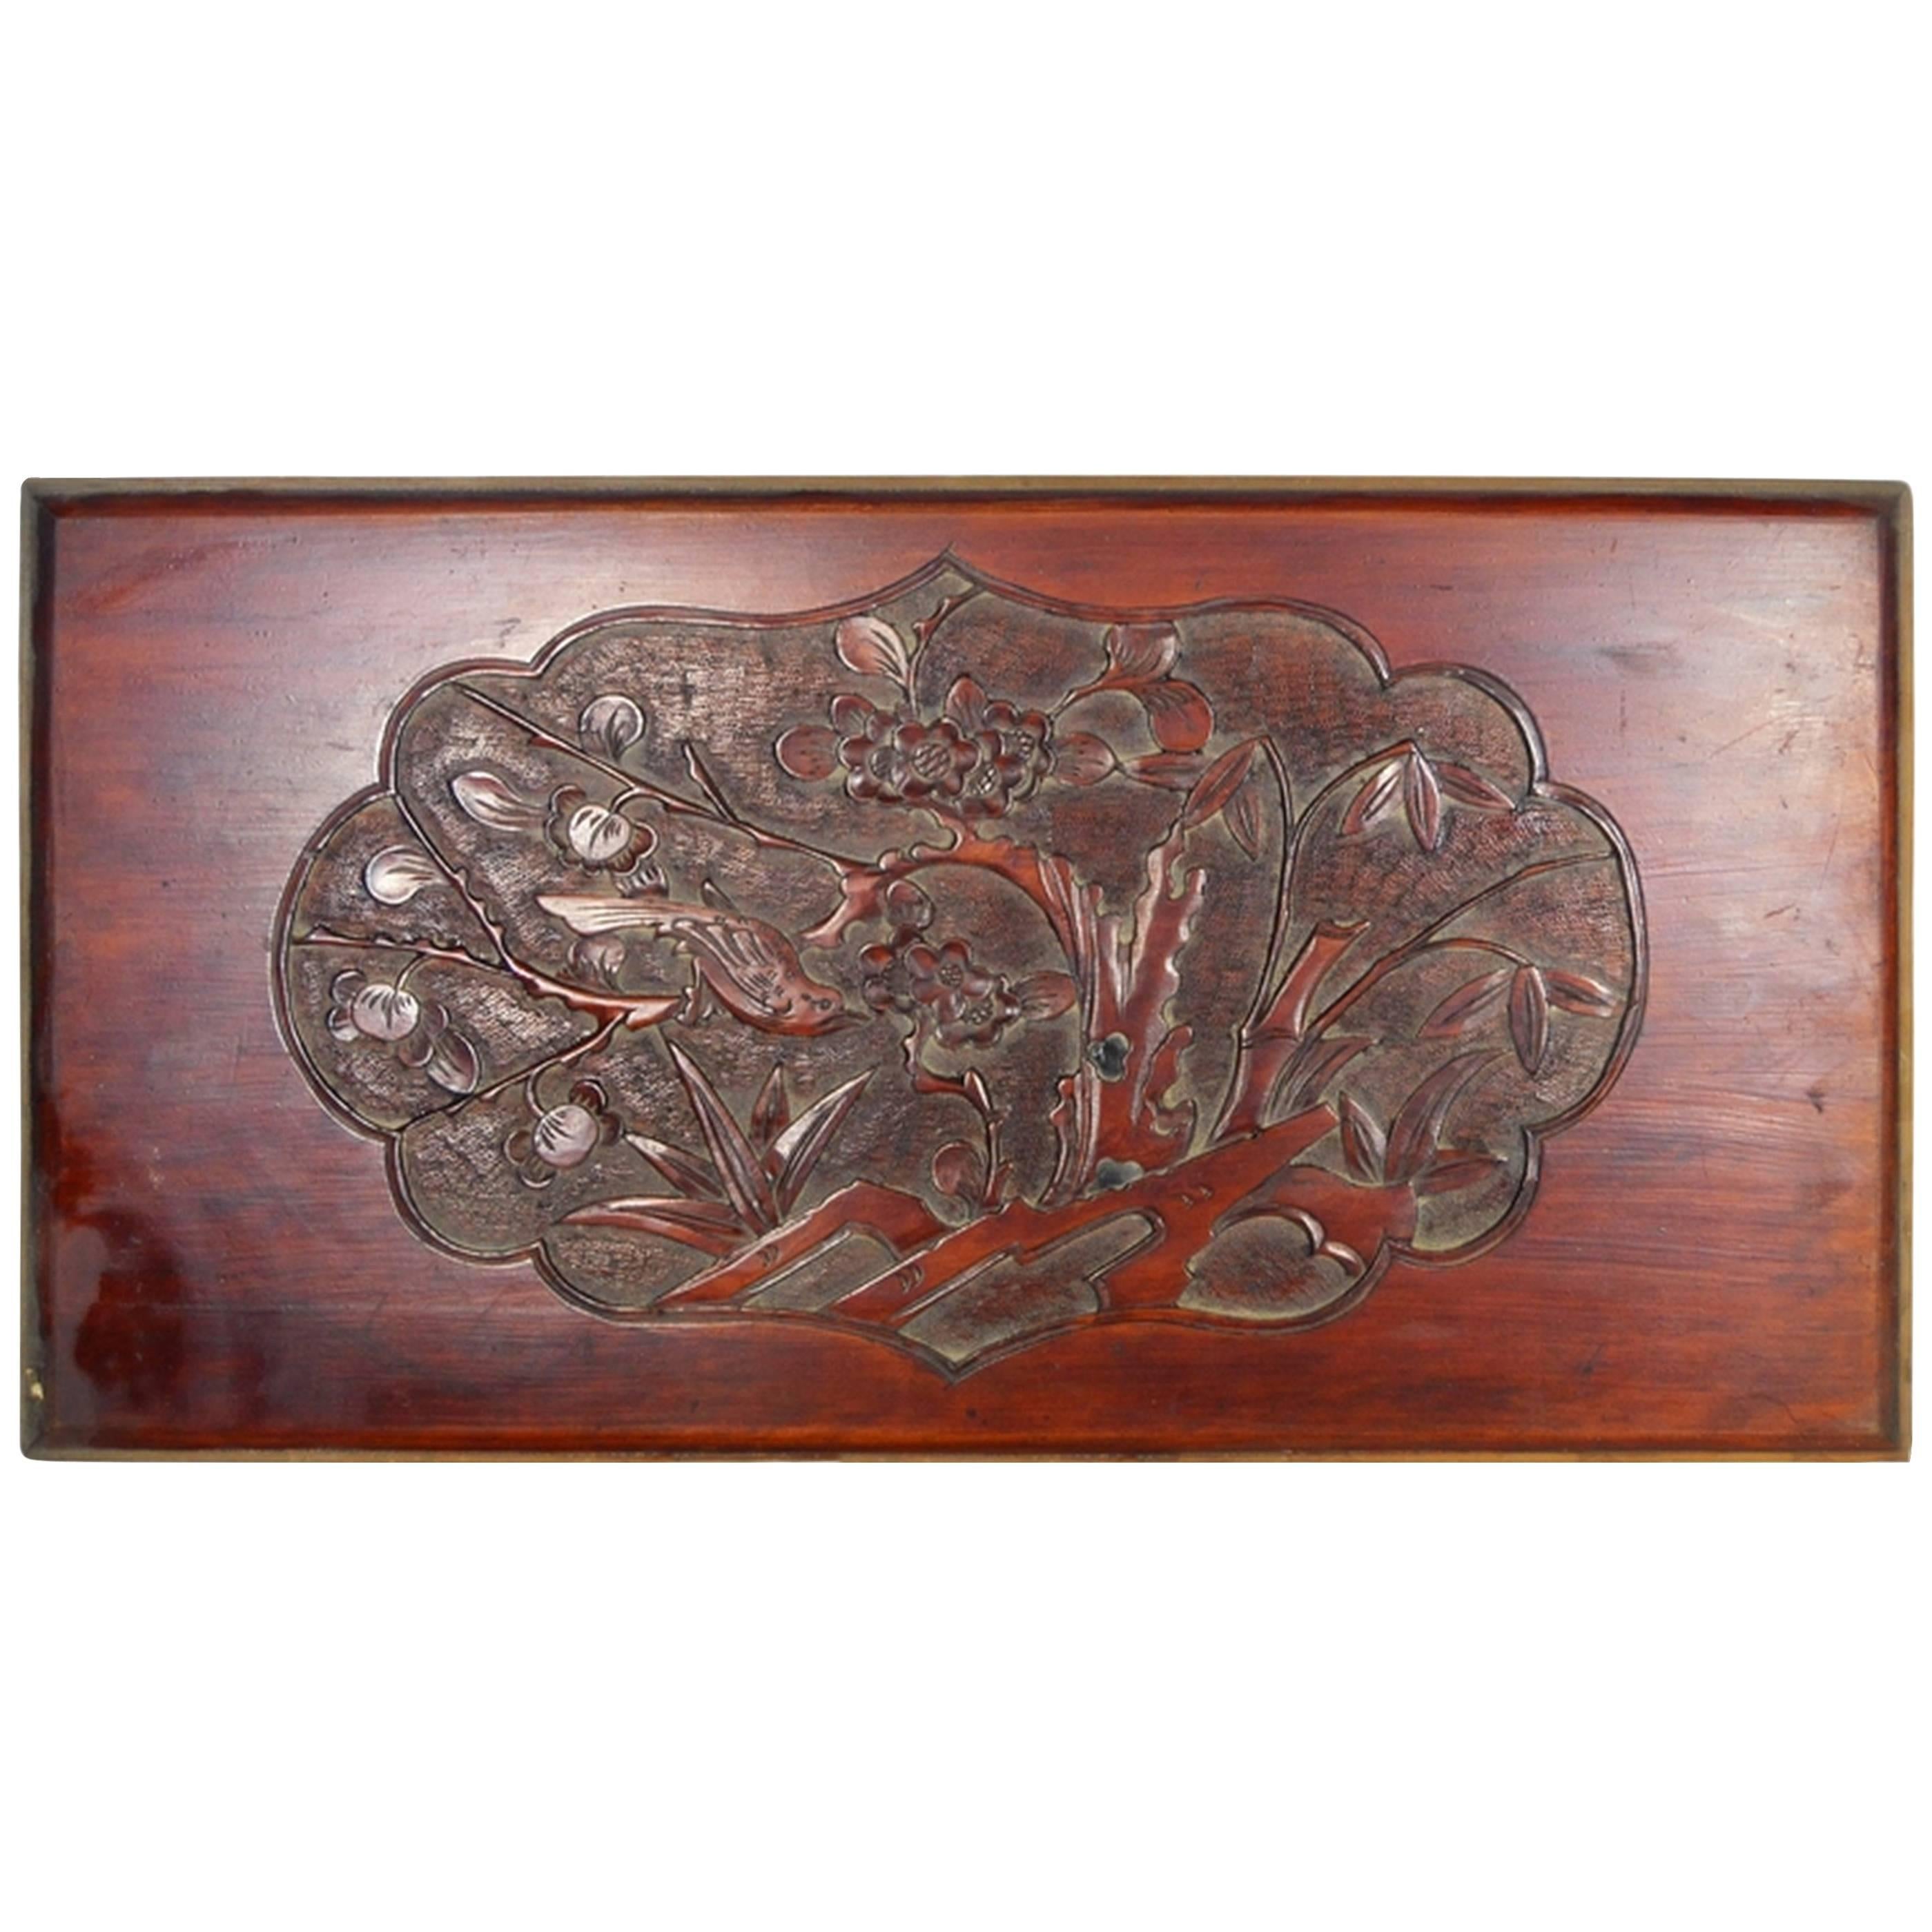 Antique Hand-Carved Lacquered Rosewood Wall Plaque from China, 19th Century For Sale